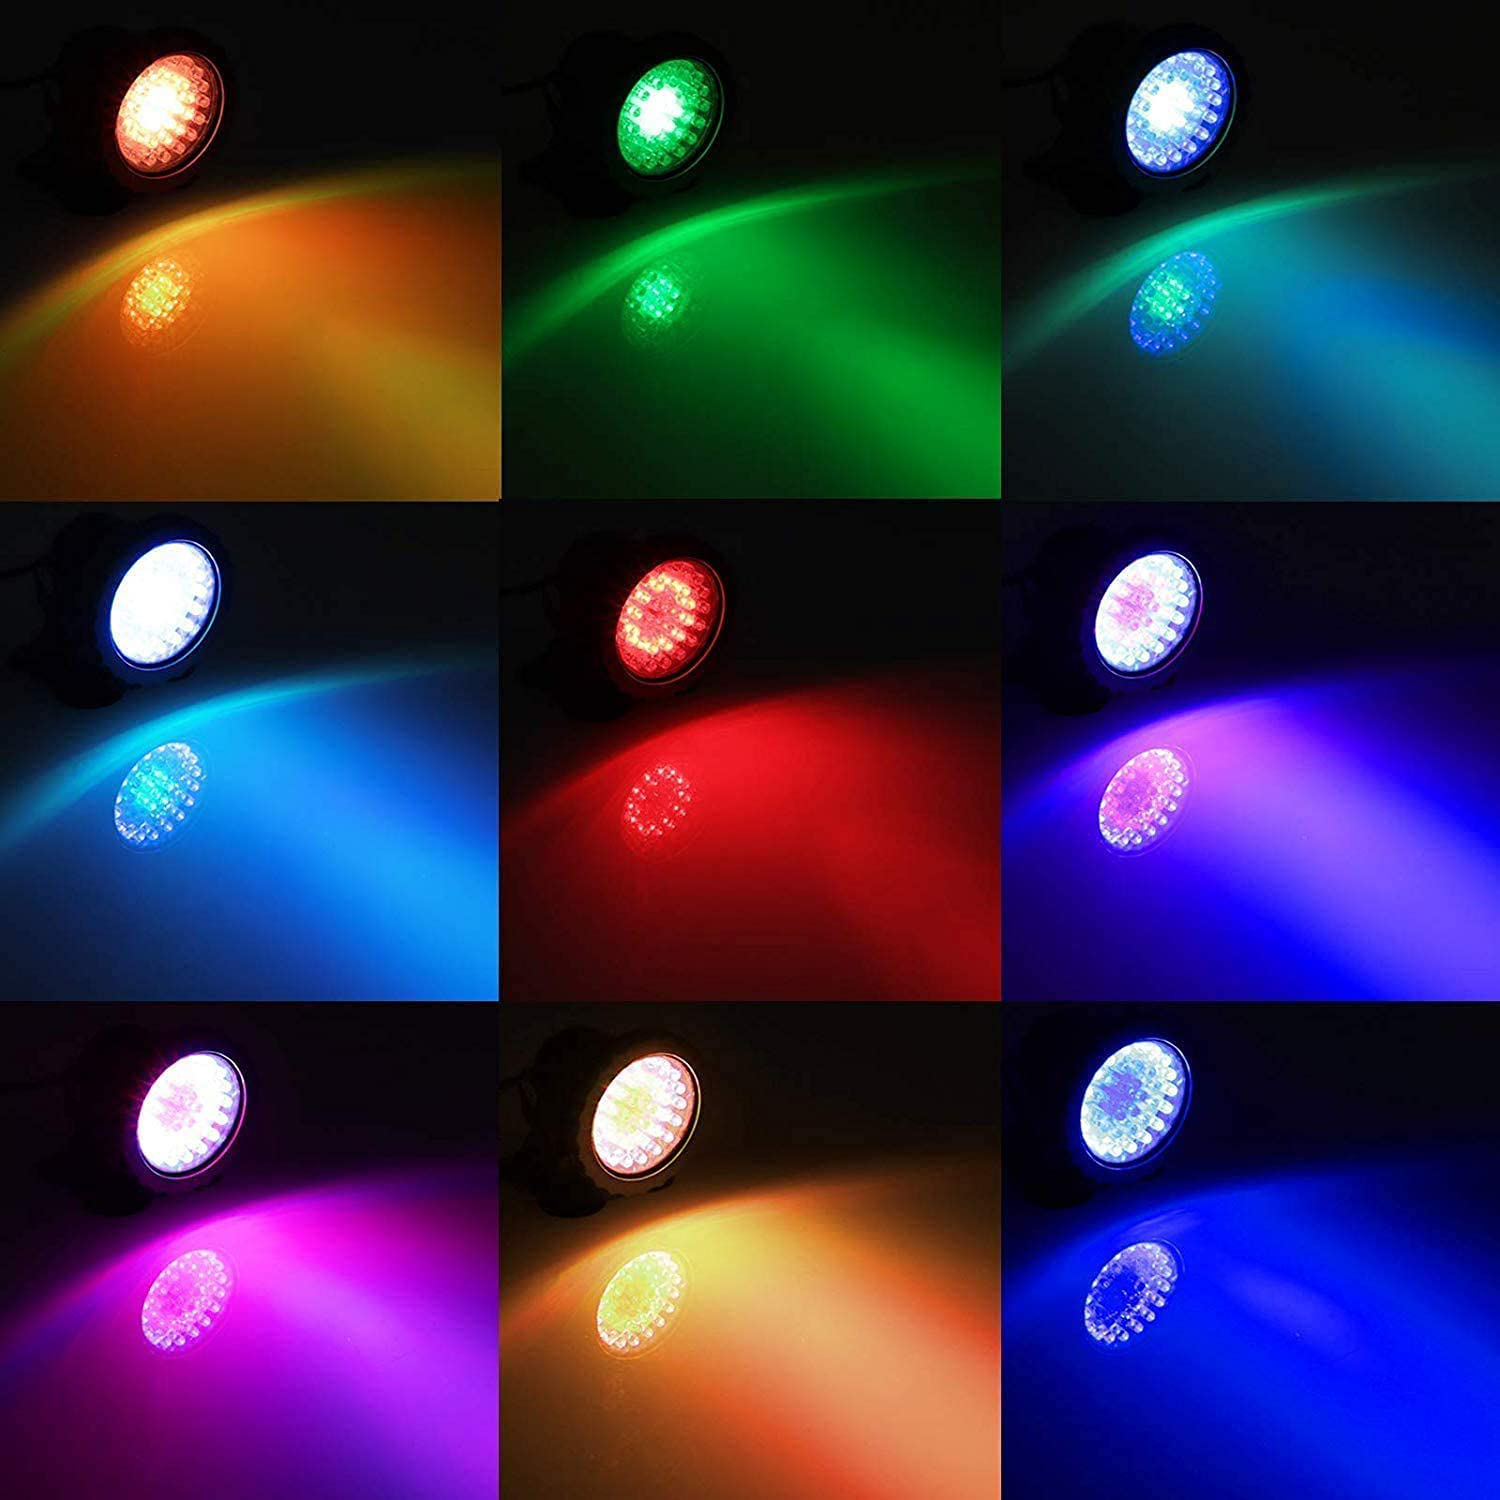 Greensun Pond Lights, Aquarium Light, Submersible LED Lights with Remote Control, IP68 Waterproof Fish Tank Ligh, RGB Color Changing, 8W 36 LED Underwater Spot Lights (Set of 4 Lights)